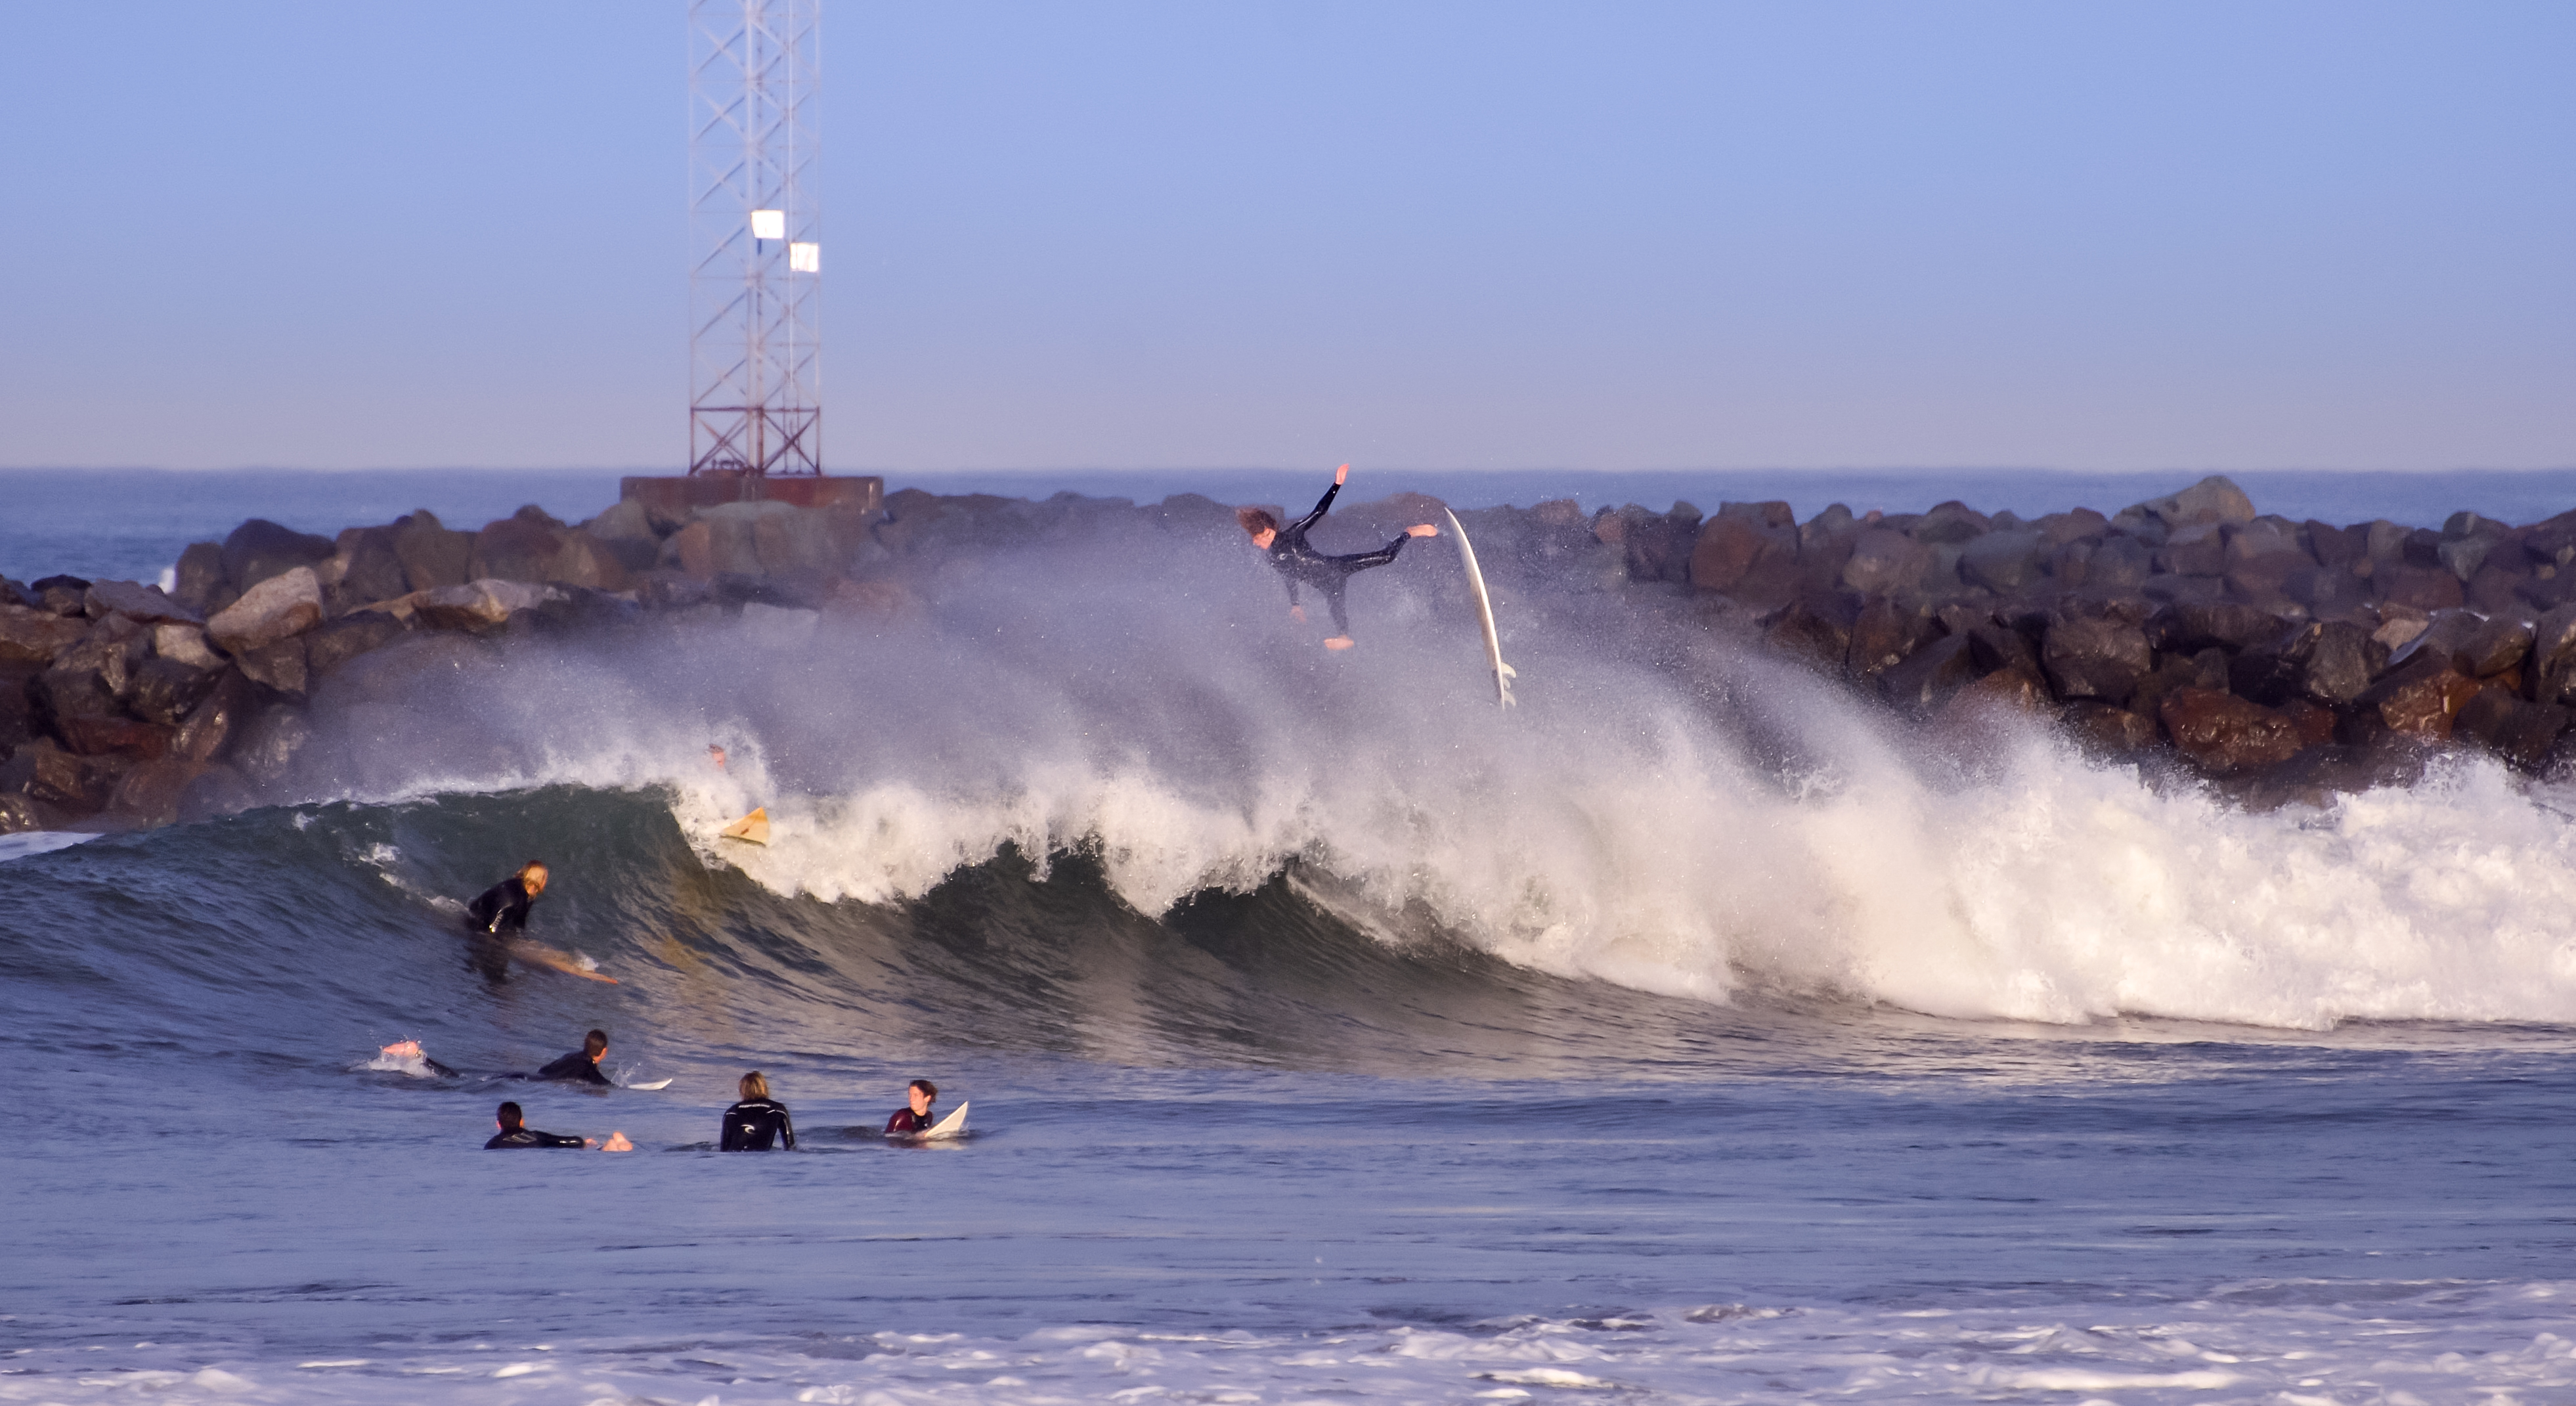 Wipe Out - Photo by Josh Utley